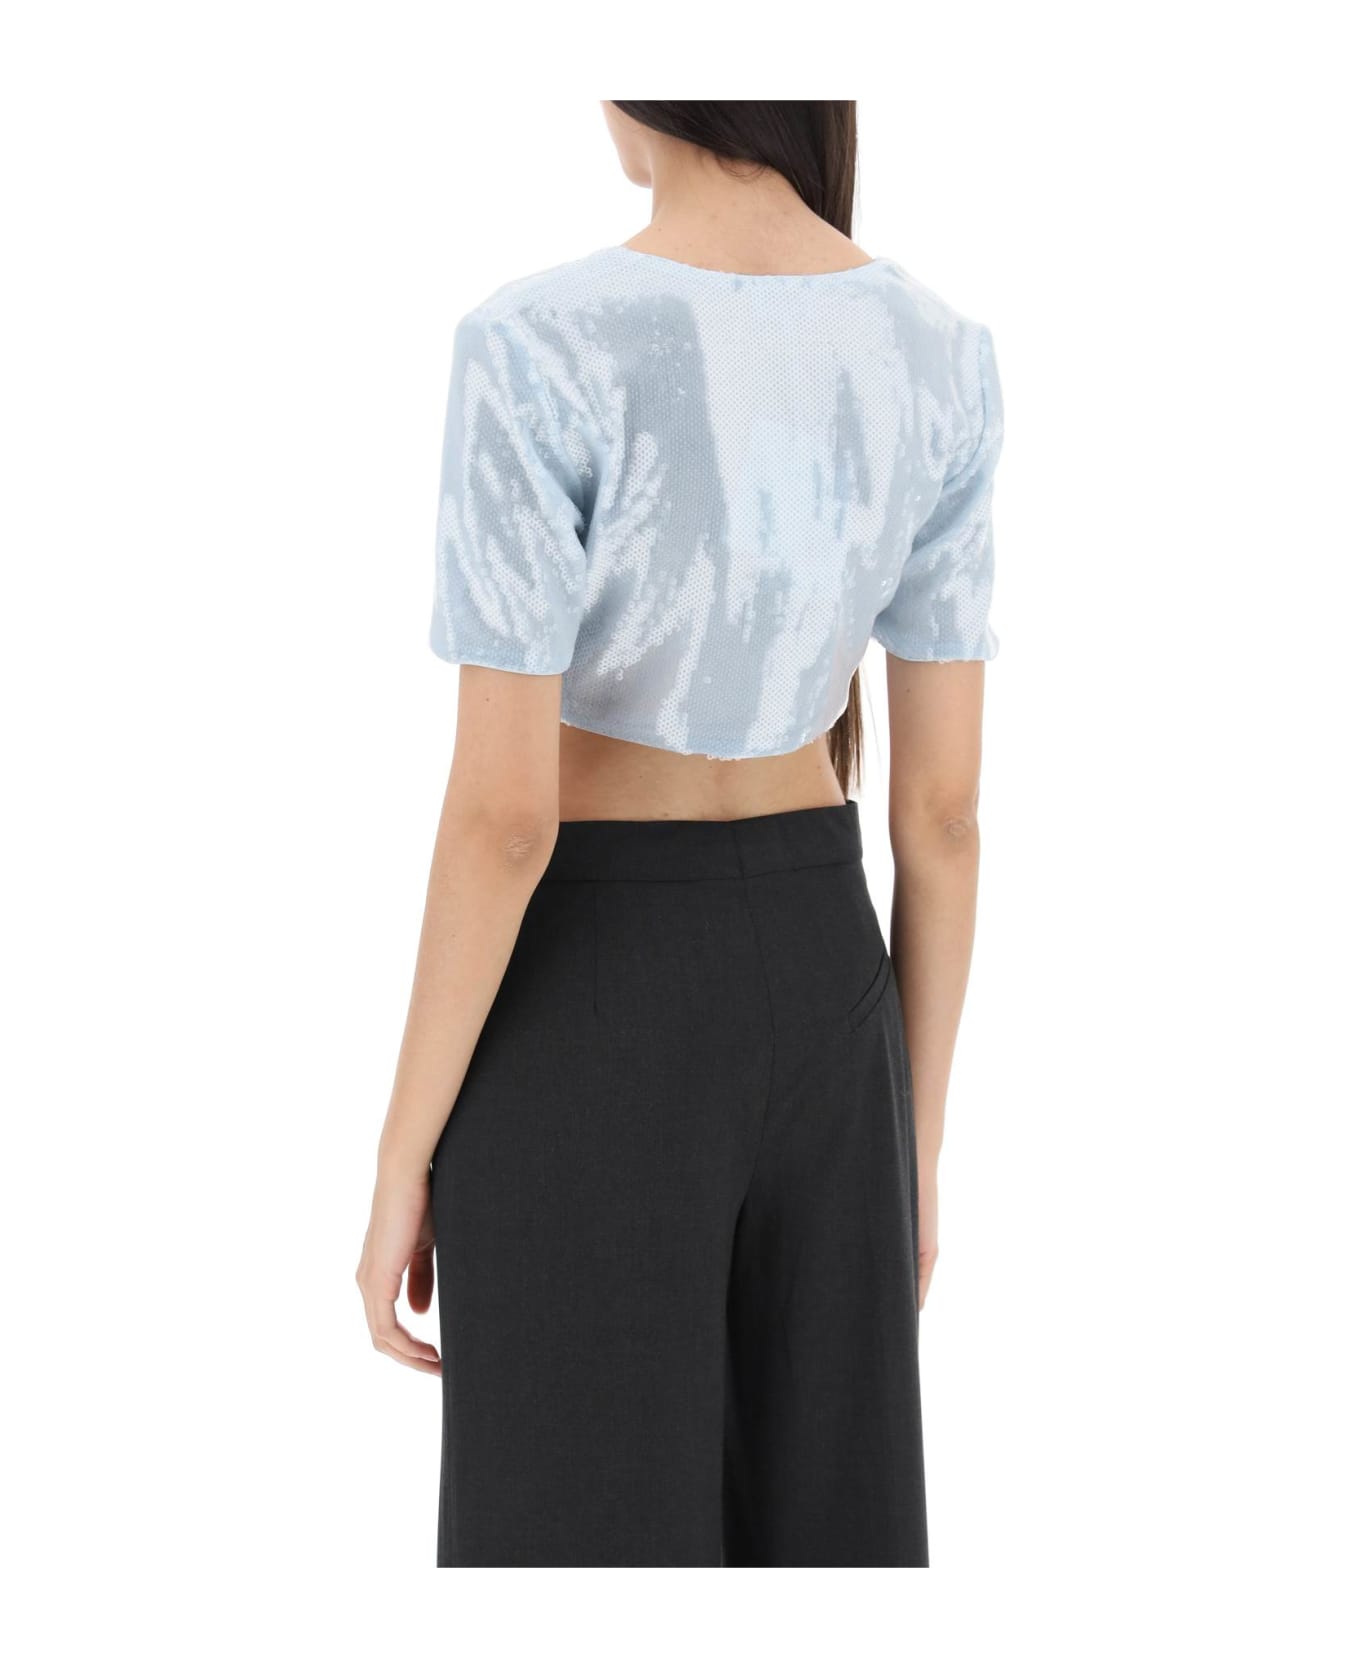 Ganni Sequin Cropped Top - ICE WATER (Light blue)